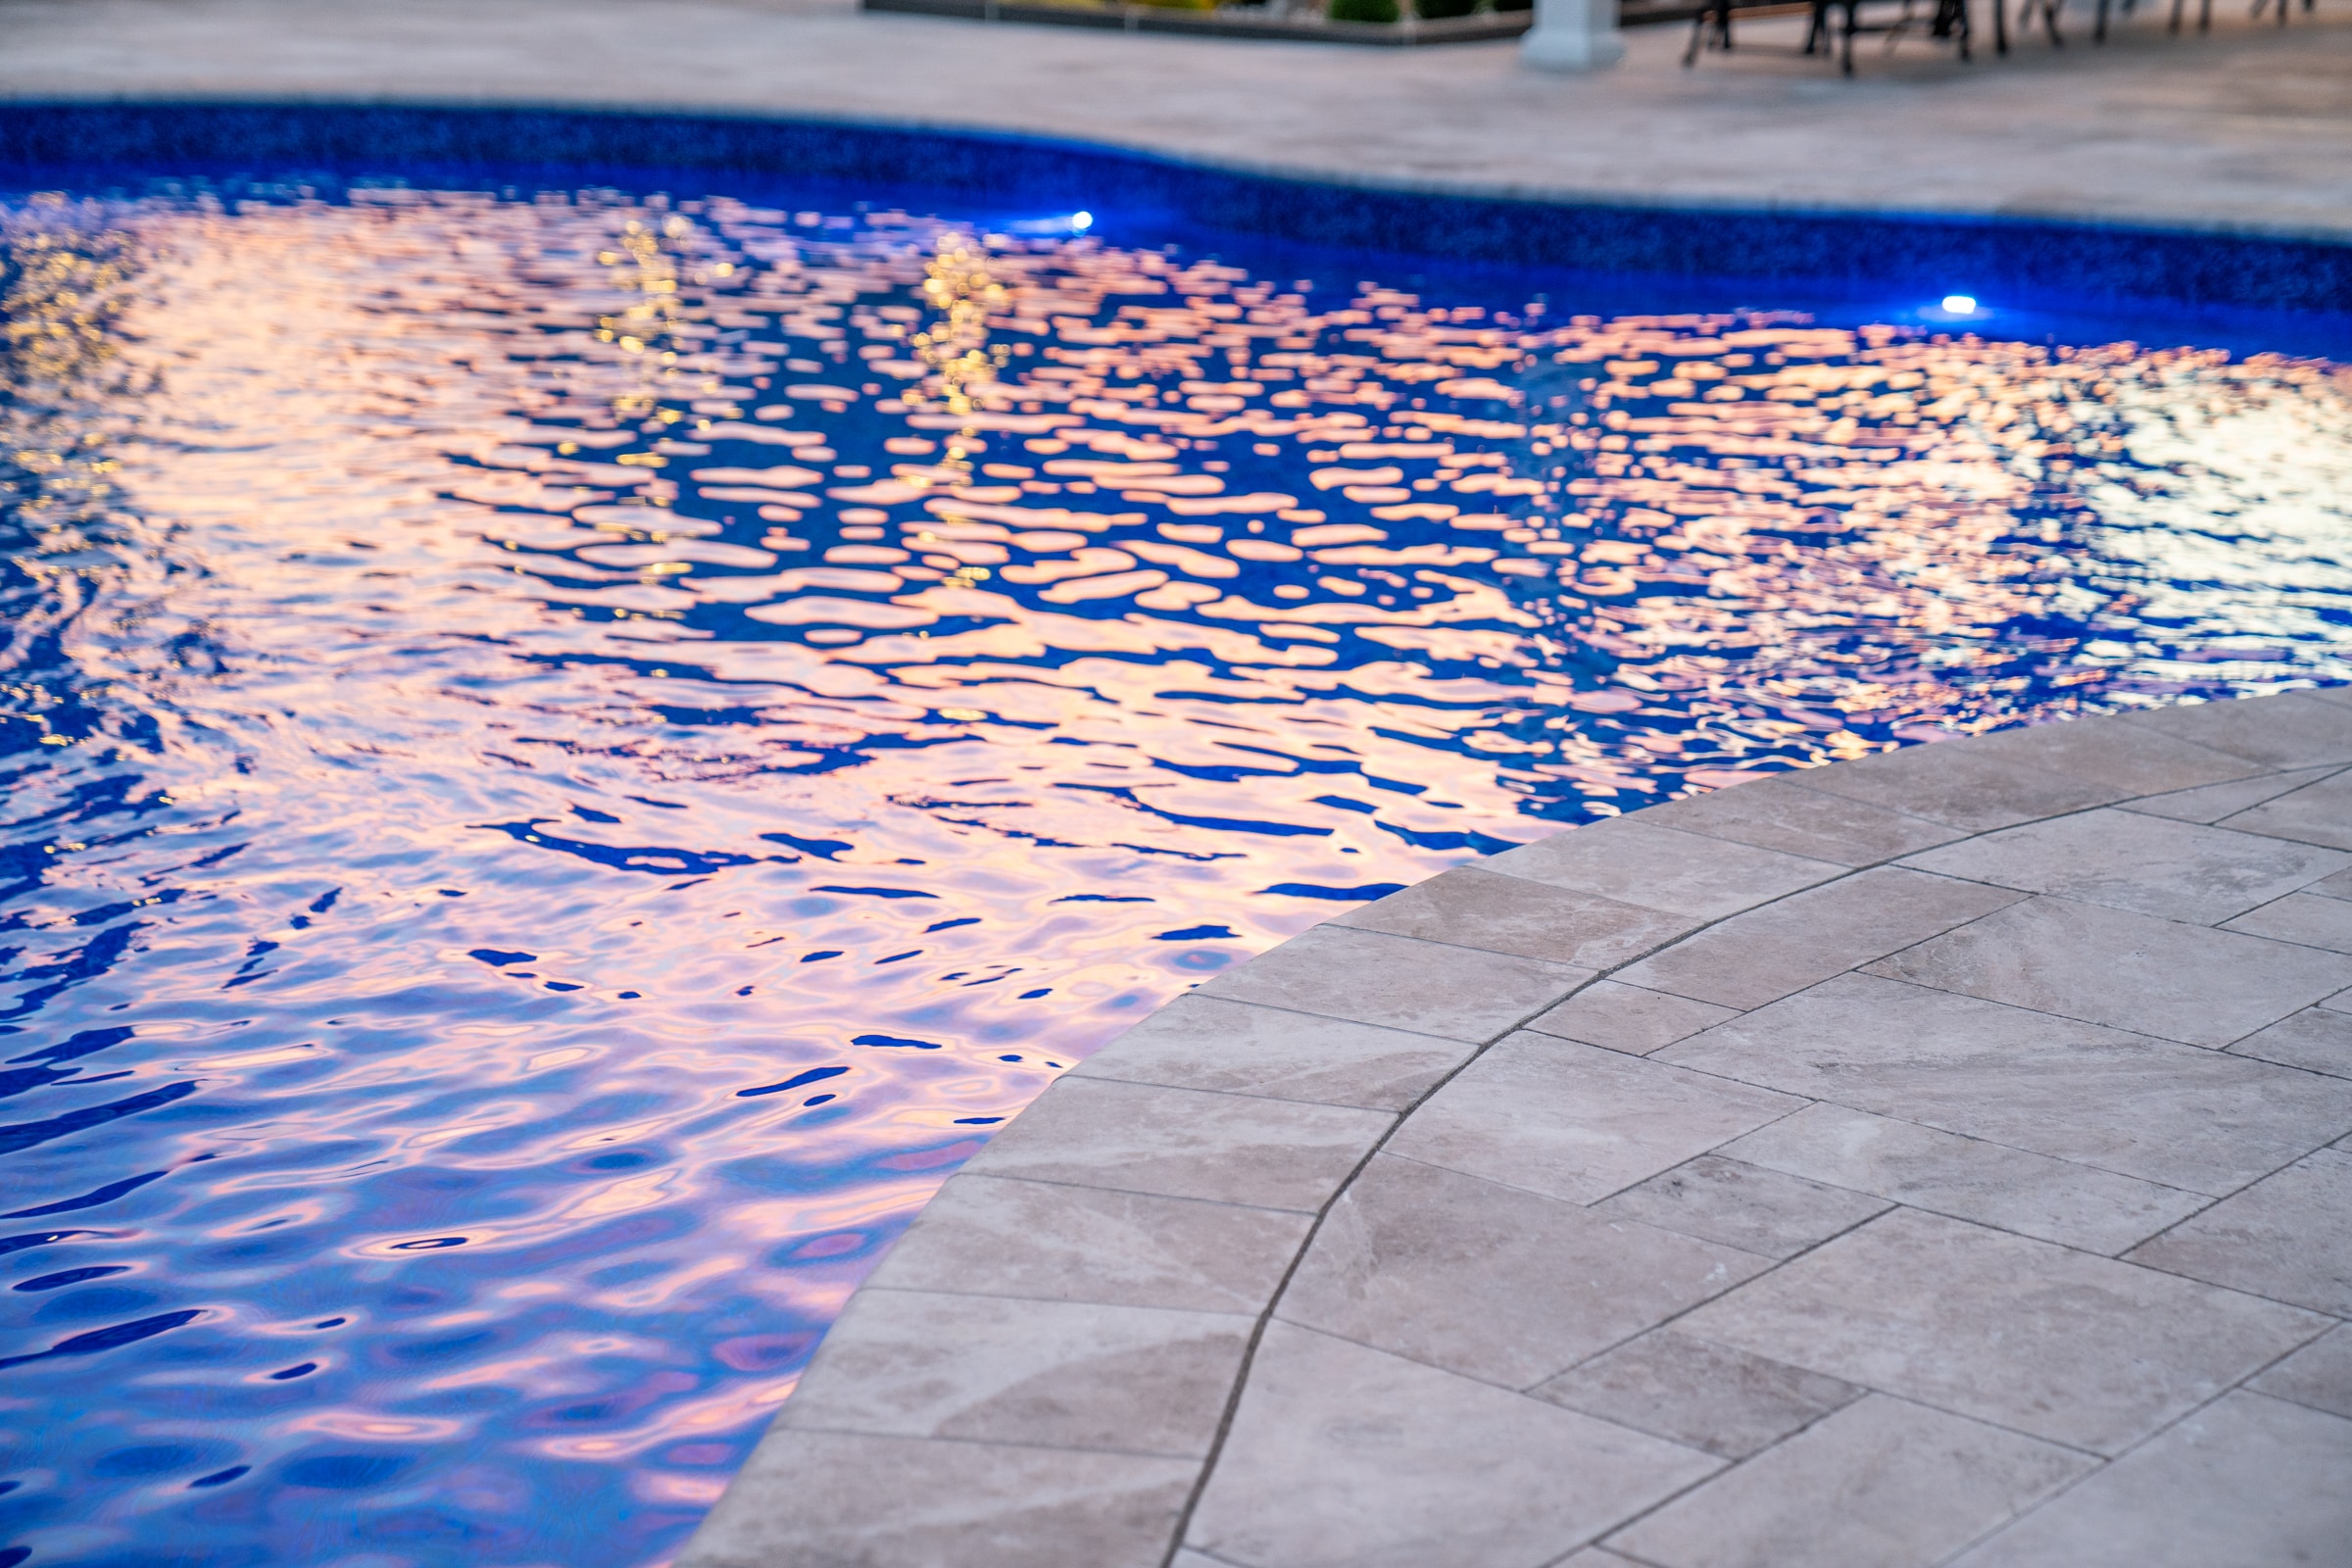 This natural stone pool deck was crafted from silver travertine by Dex by Terra in this Grafton, Massachusetts backyard.